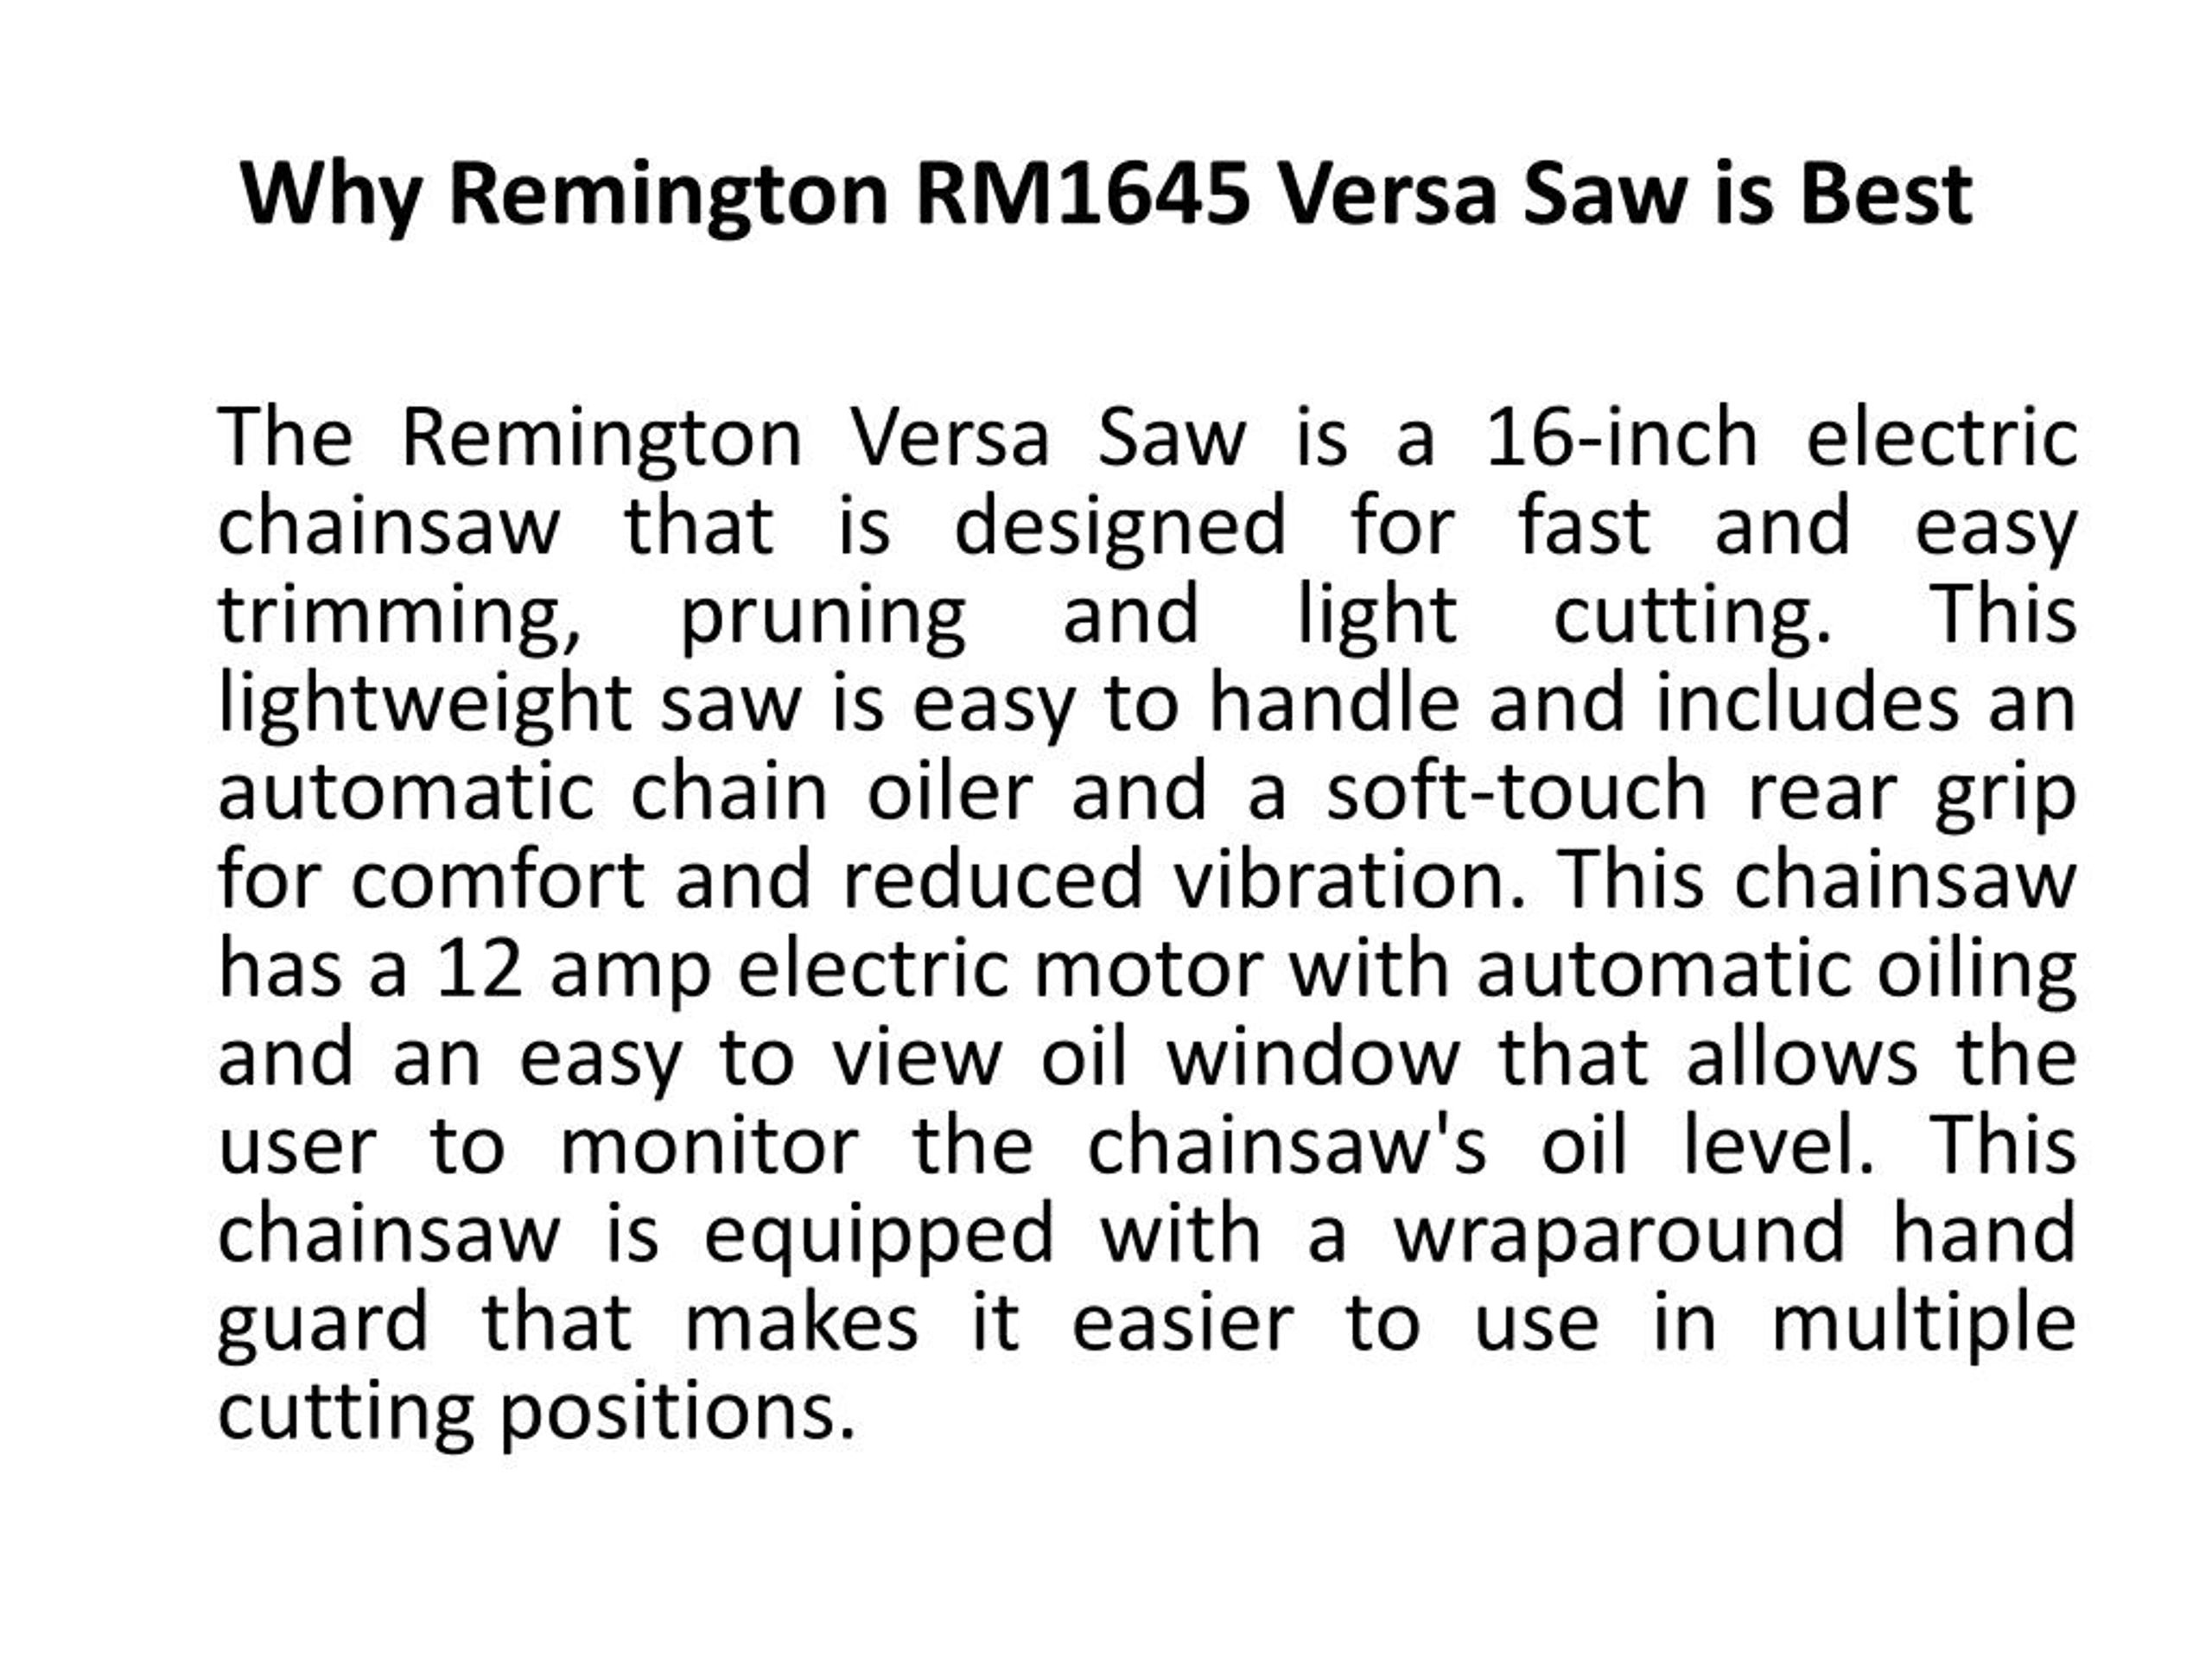 PPT - Remington RM1645 Versa Saw Electric Chainsaw Review PowerPoint